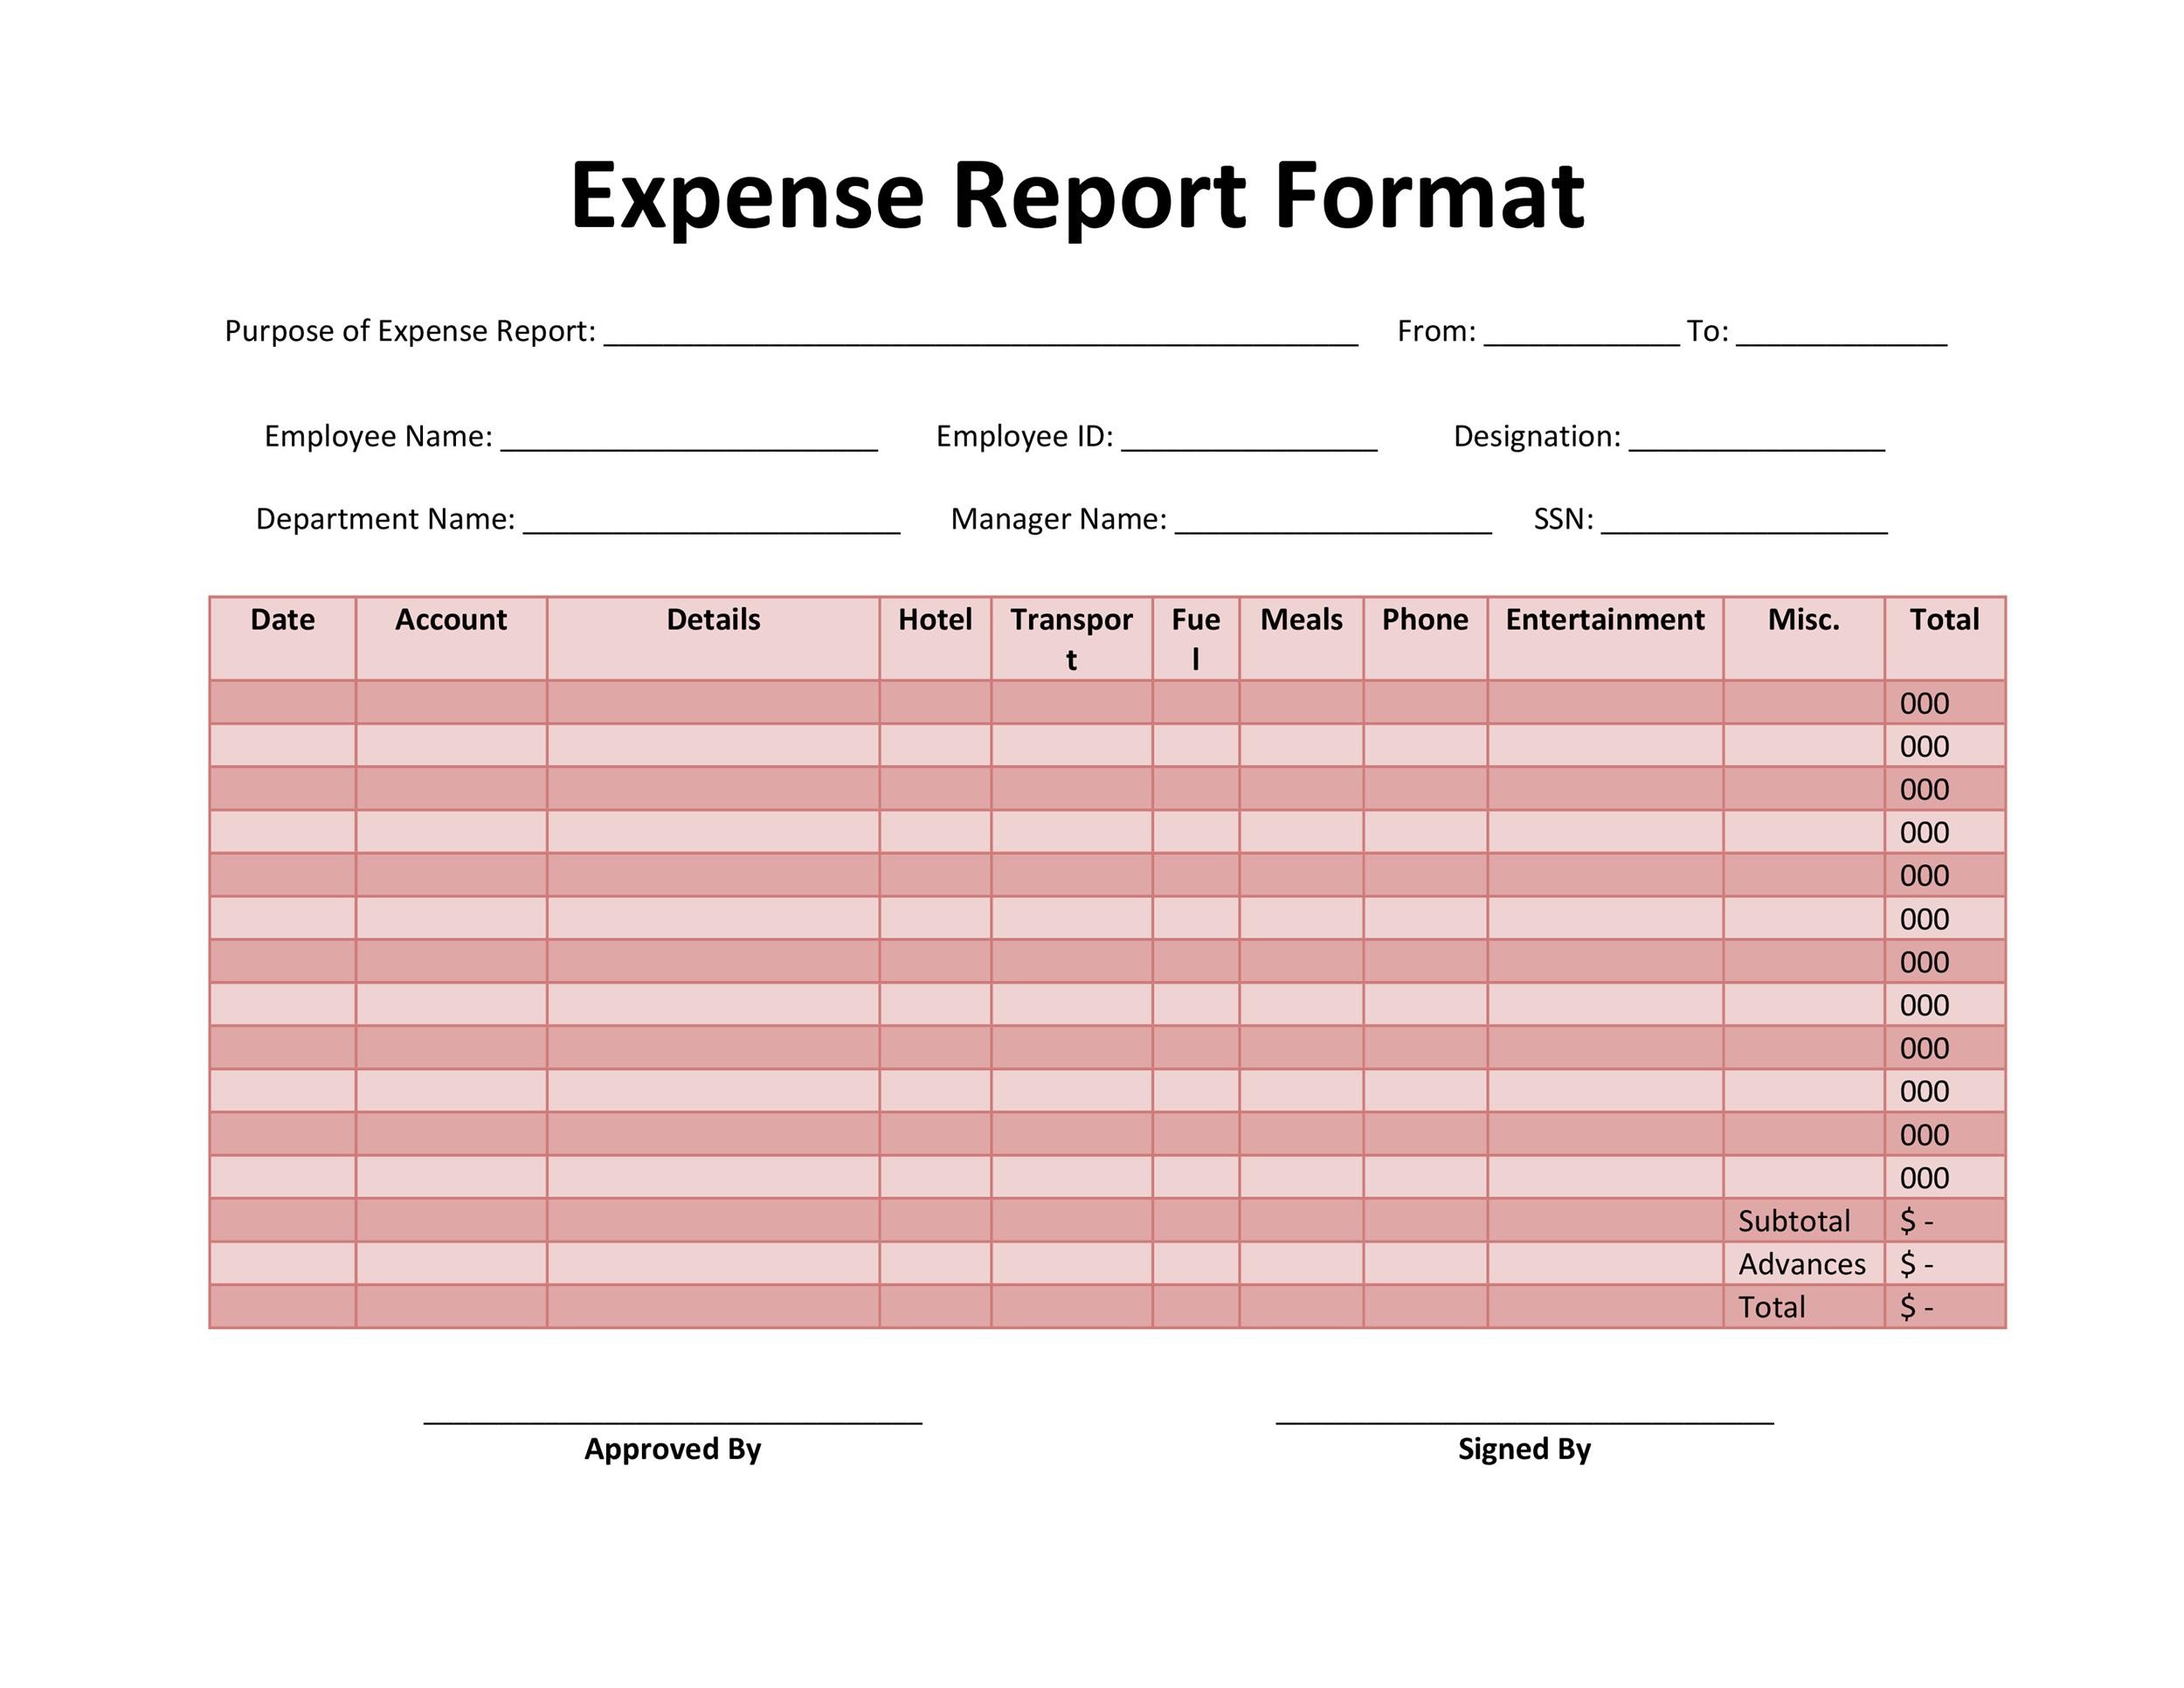 40-expense-report-templates-to-help-you-save-money-template-lab